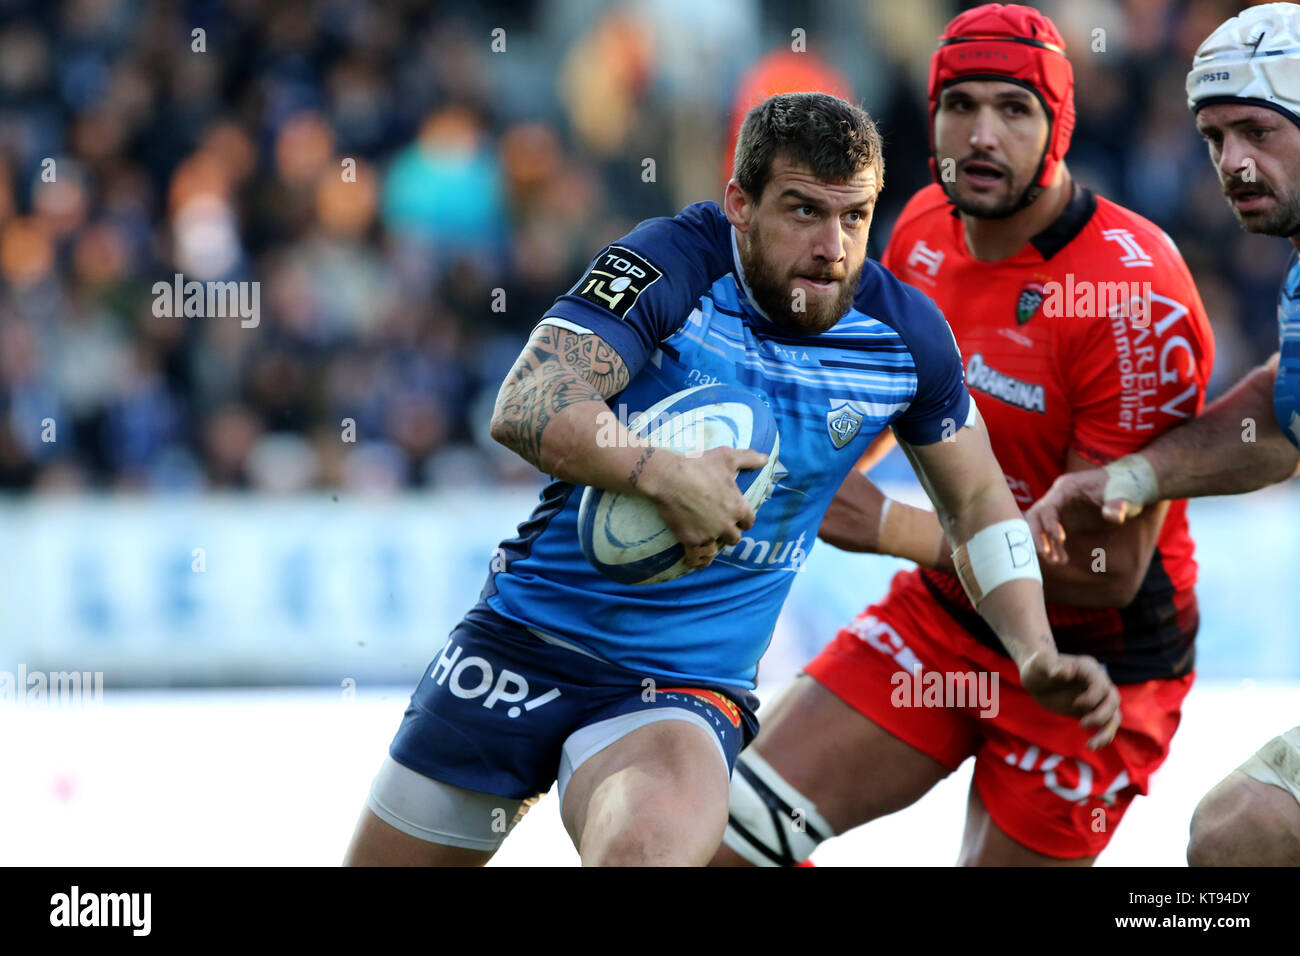 Castres (France) Nov,25th 2017 French Rugby Championship TOP 14 season 2017-2018  Castres Olympique against RC Toulon JULIEN CAMINATI Credit: Sebastien  Lapeyrere/Alamy Live News Stock Photo - Alamy